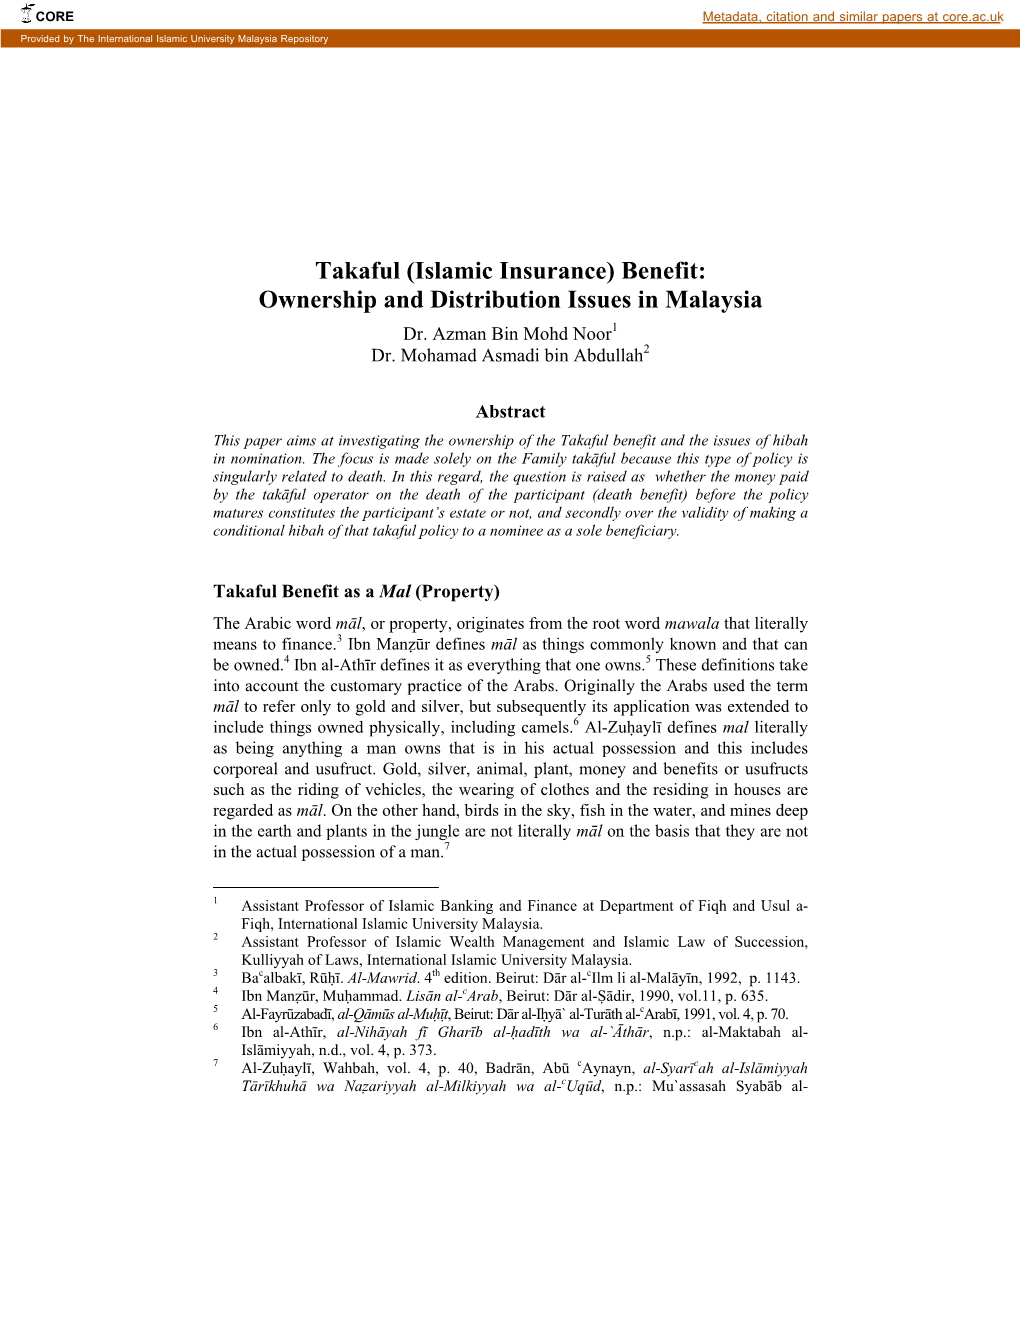 Takaful (Islamic Insurance) Benefit: Ownership and Distribution Issues in Malaysia Dr